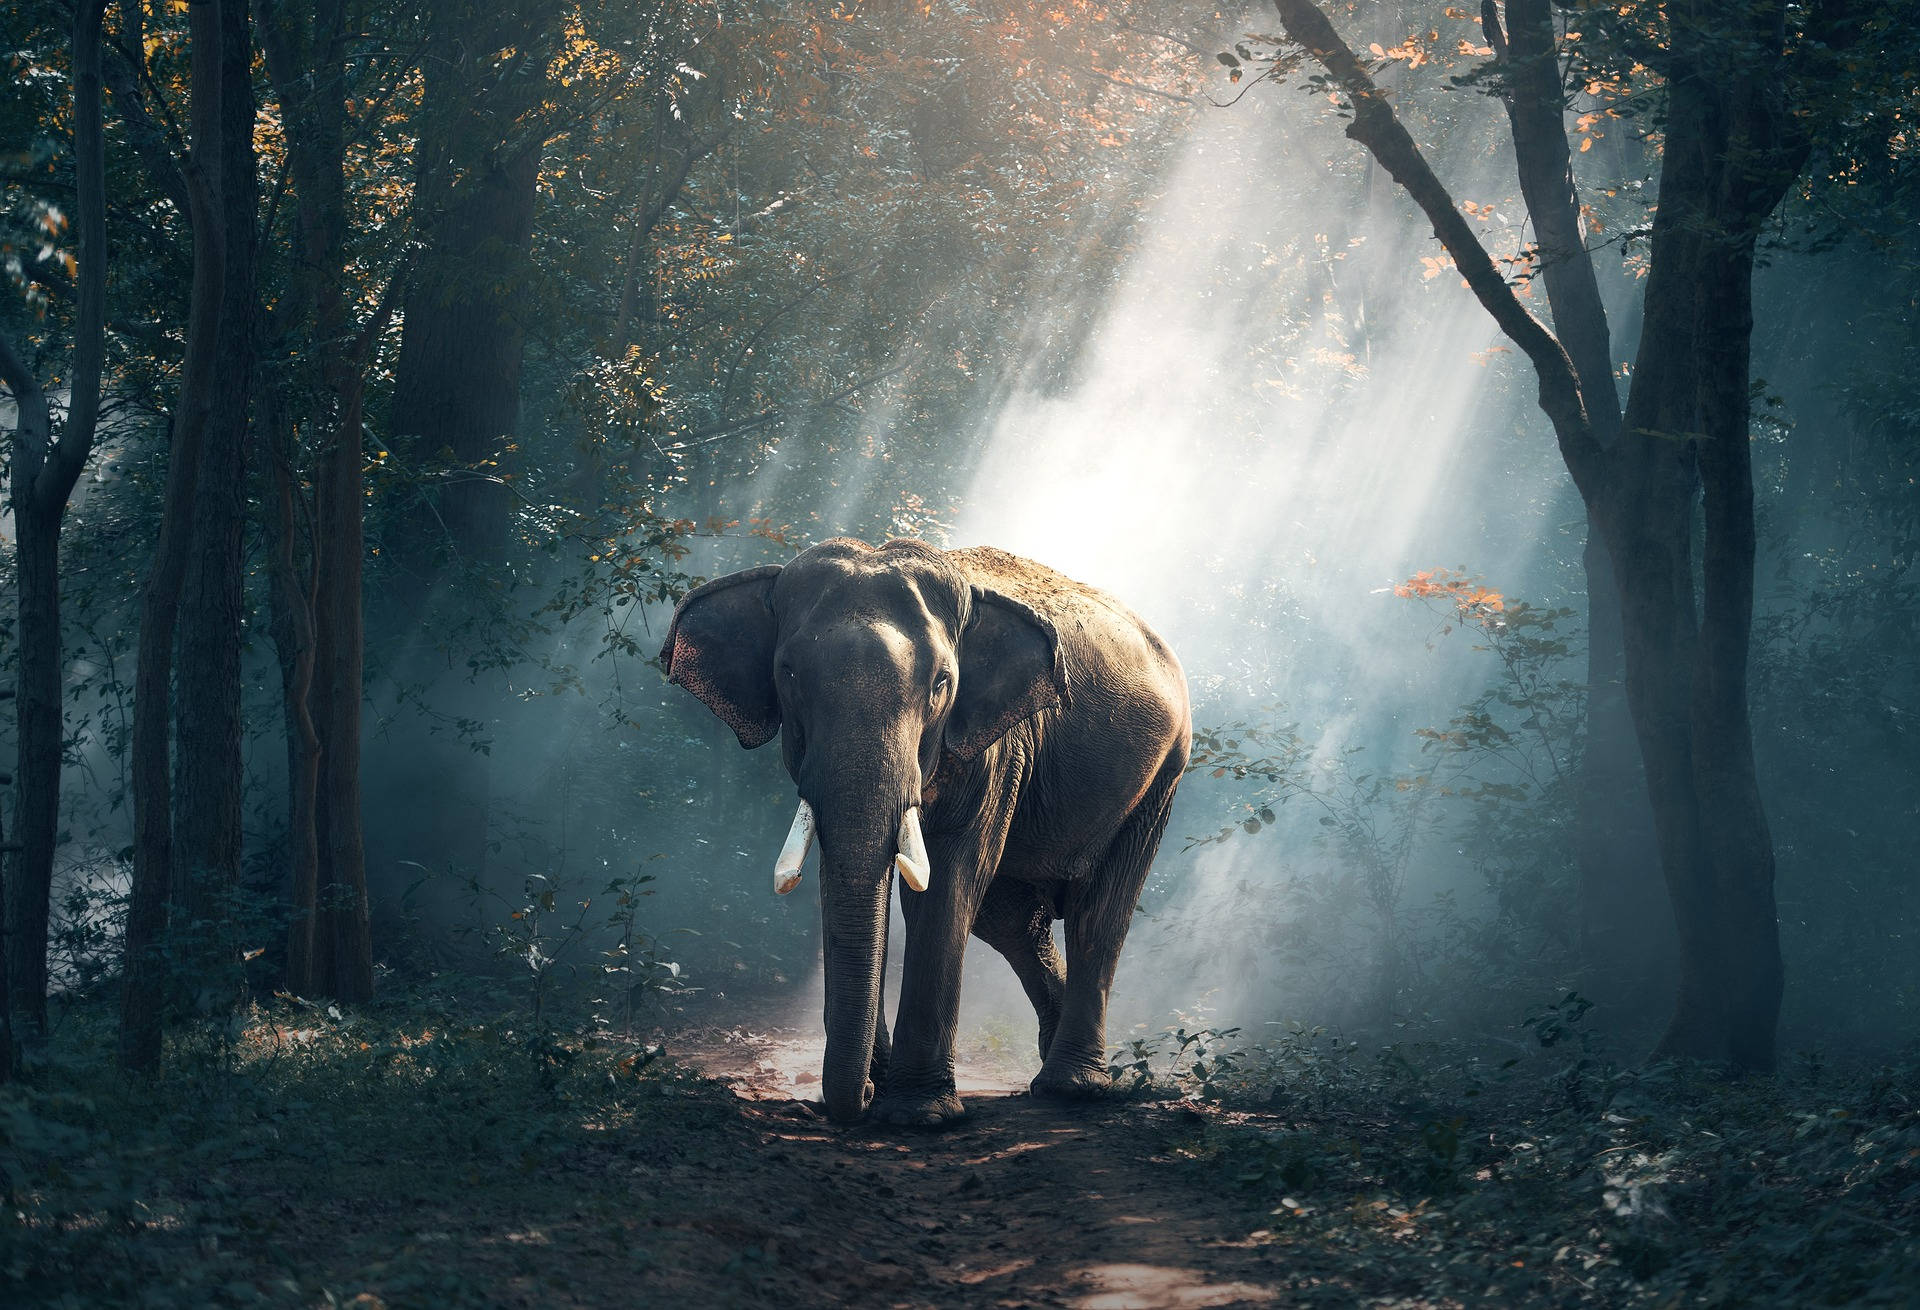 An Elephant In The Woods Wallpaper